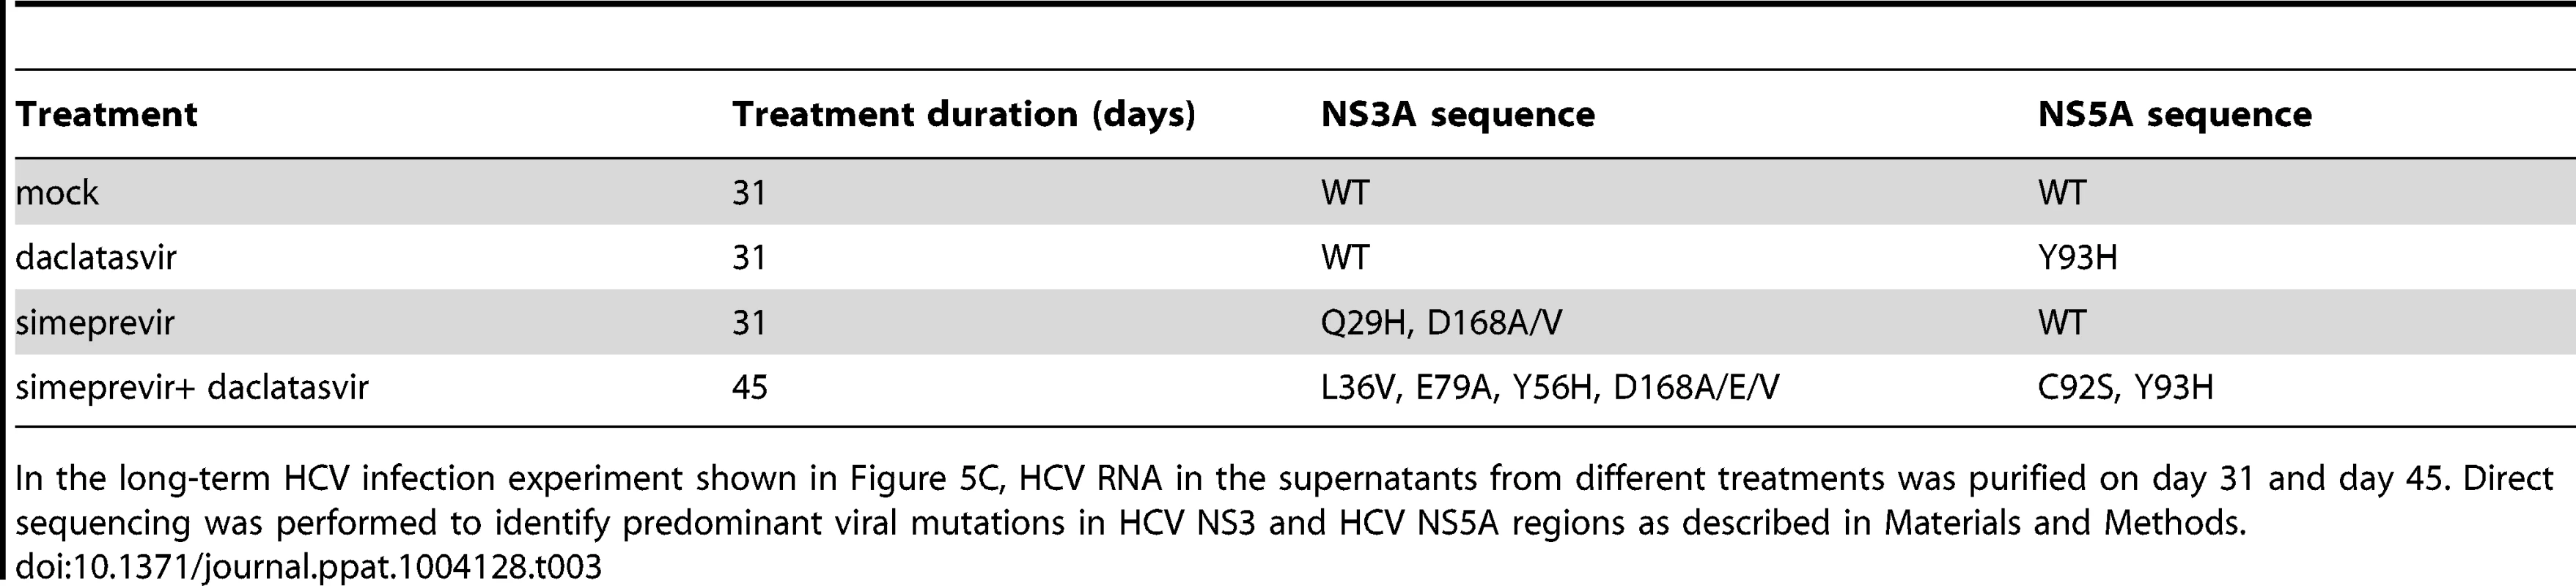 Analysis of NS3A and NS5A mutations during DAA monotherapy or treatment with a combination of DAAs.